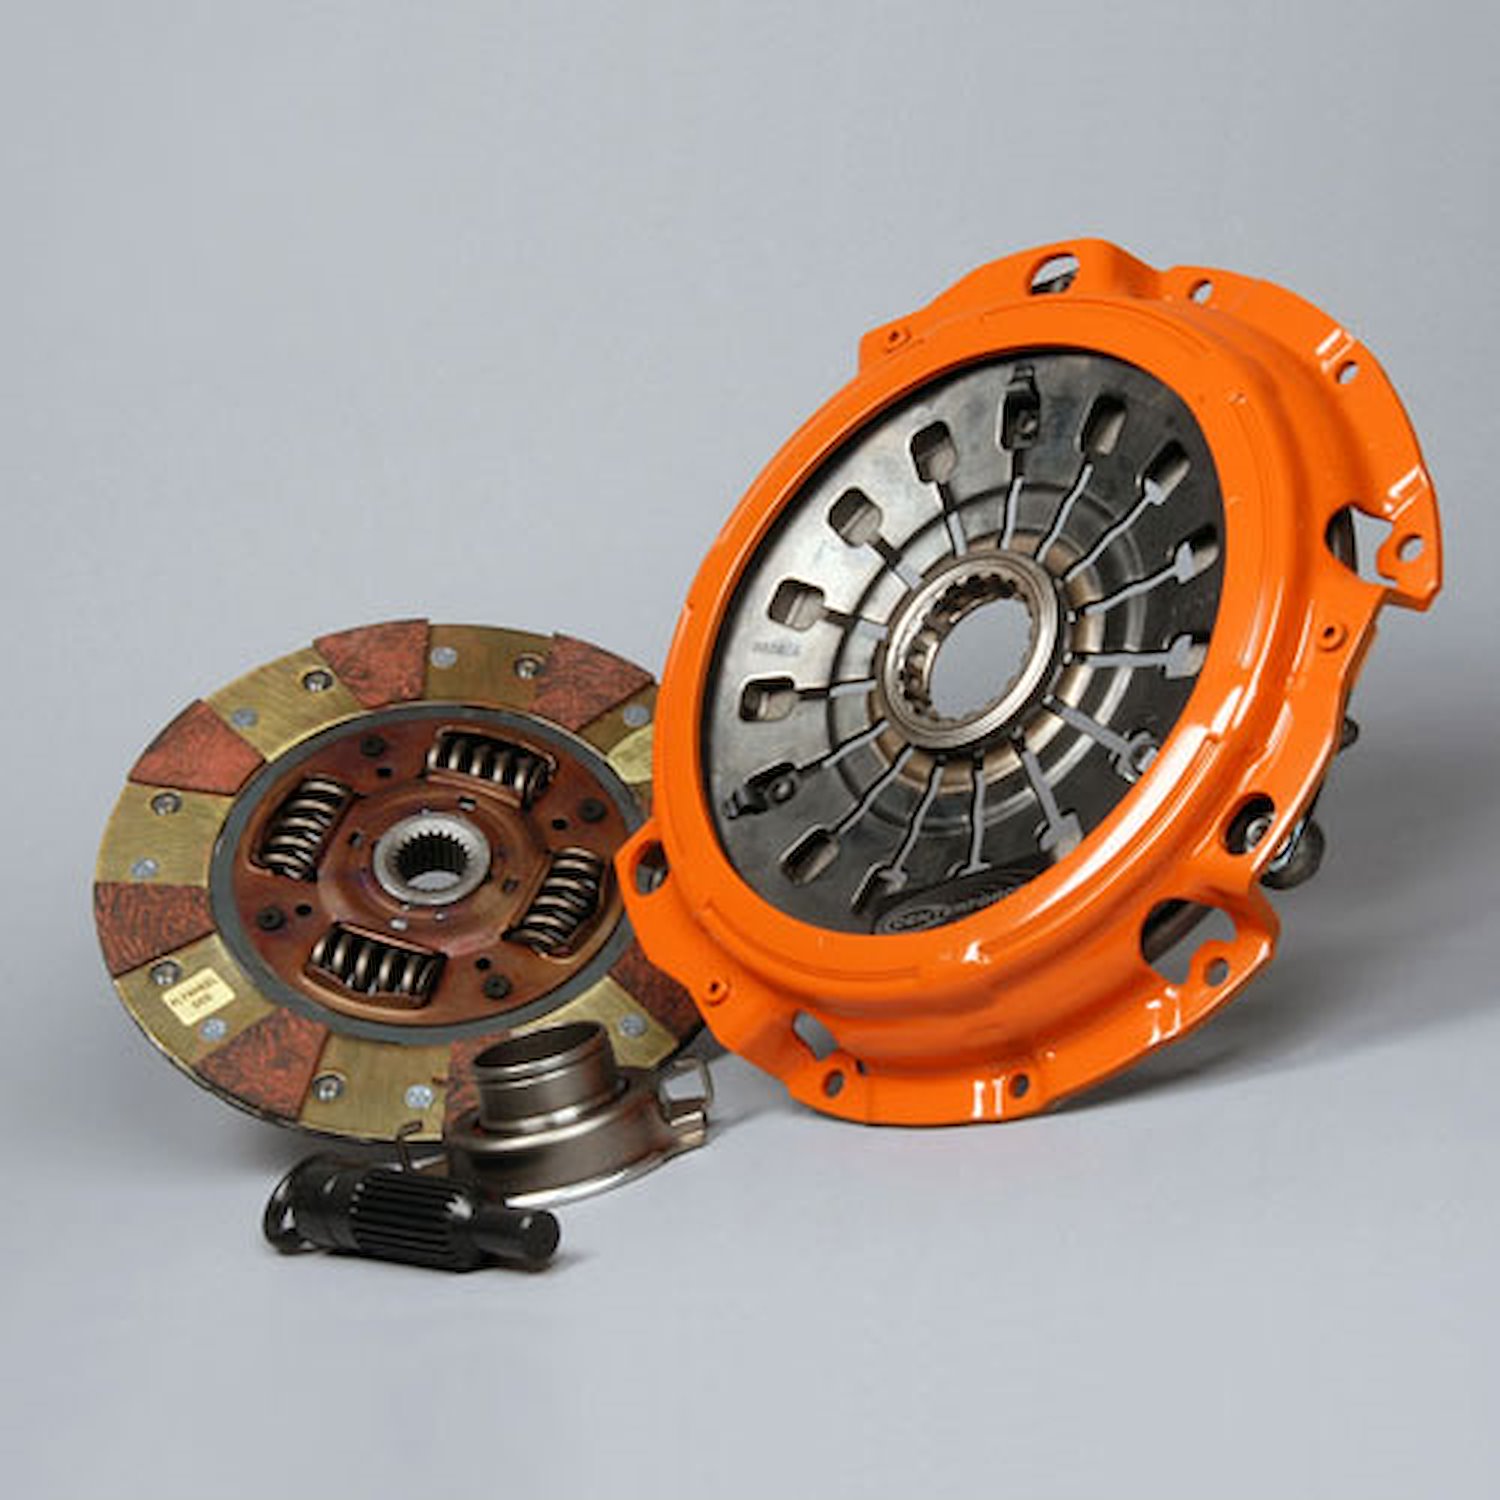 Dual Friction Clutch Includes Pressure Plate, Disc, Throw Out Bearing, Pilot Bearing, & Alignment Tool